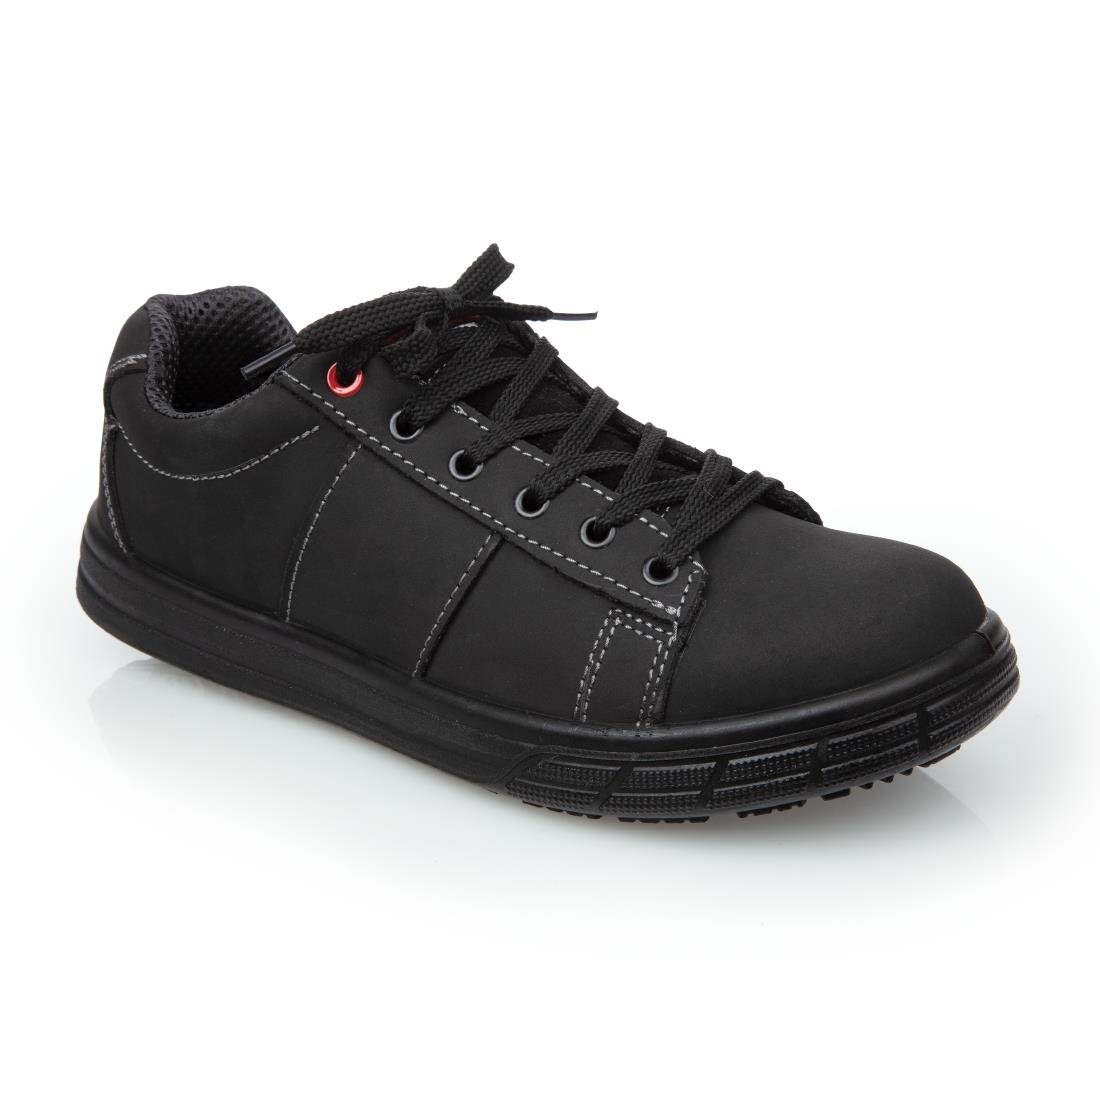 BB420-45 Slipbuster Safety Trainers Black 45